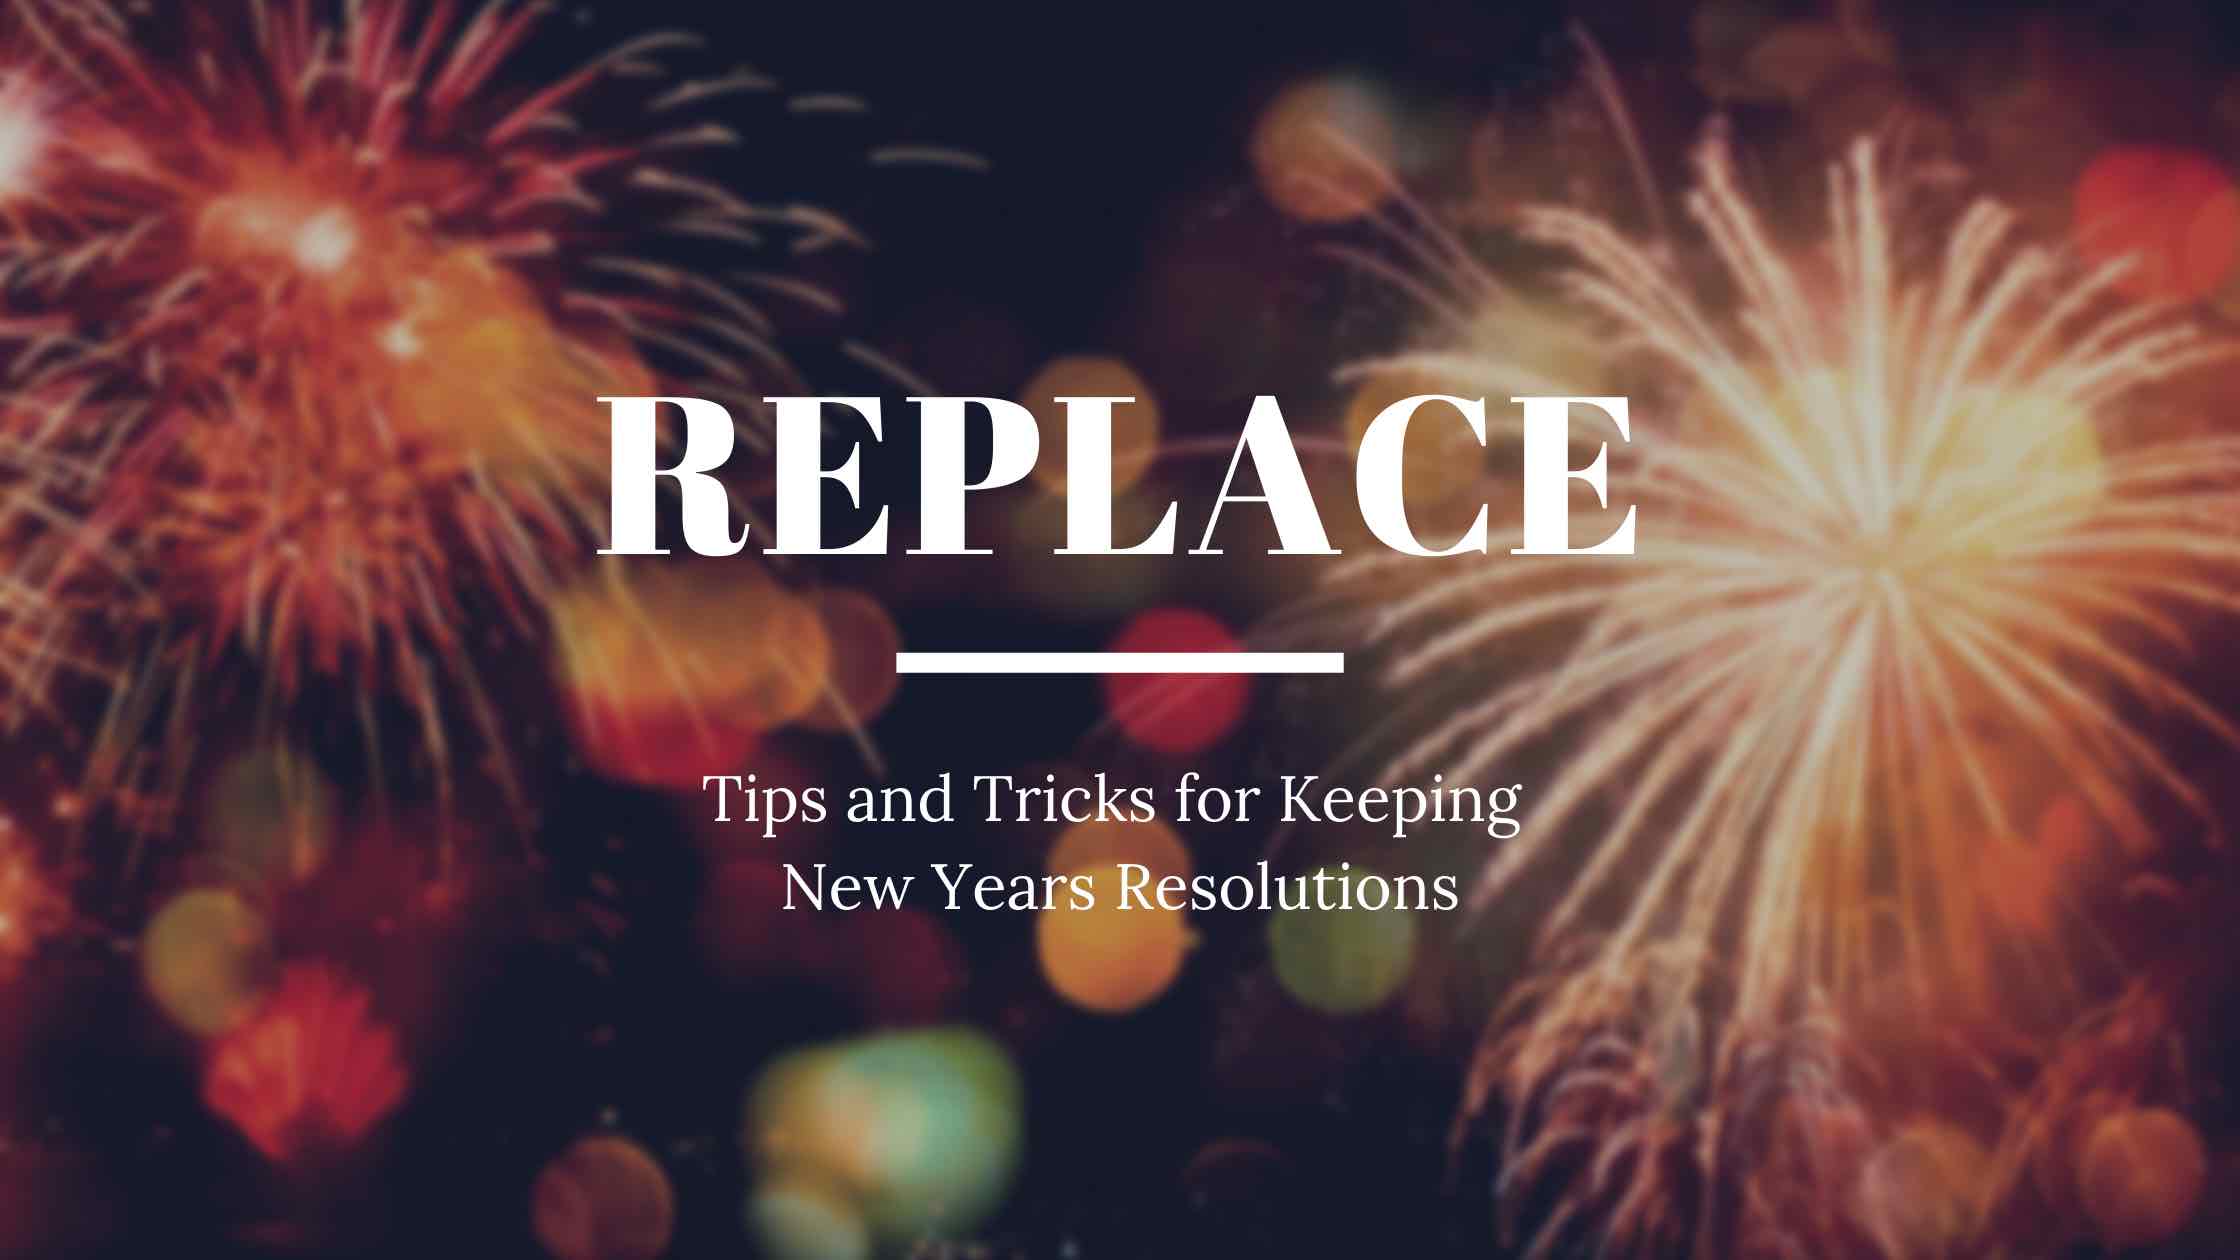 Fireworks go off in the background as a metaphor for how to keep your resolutions, one idea being replacing bad habits with better ones.